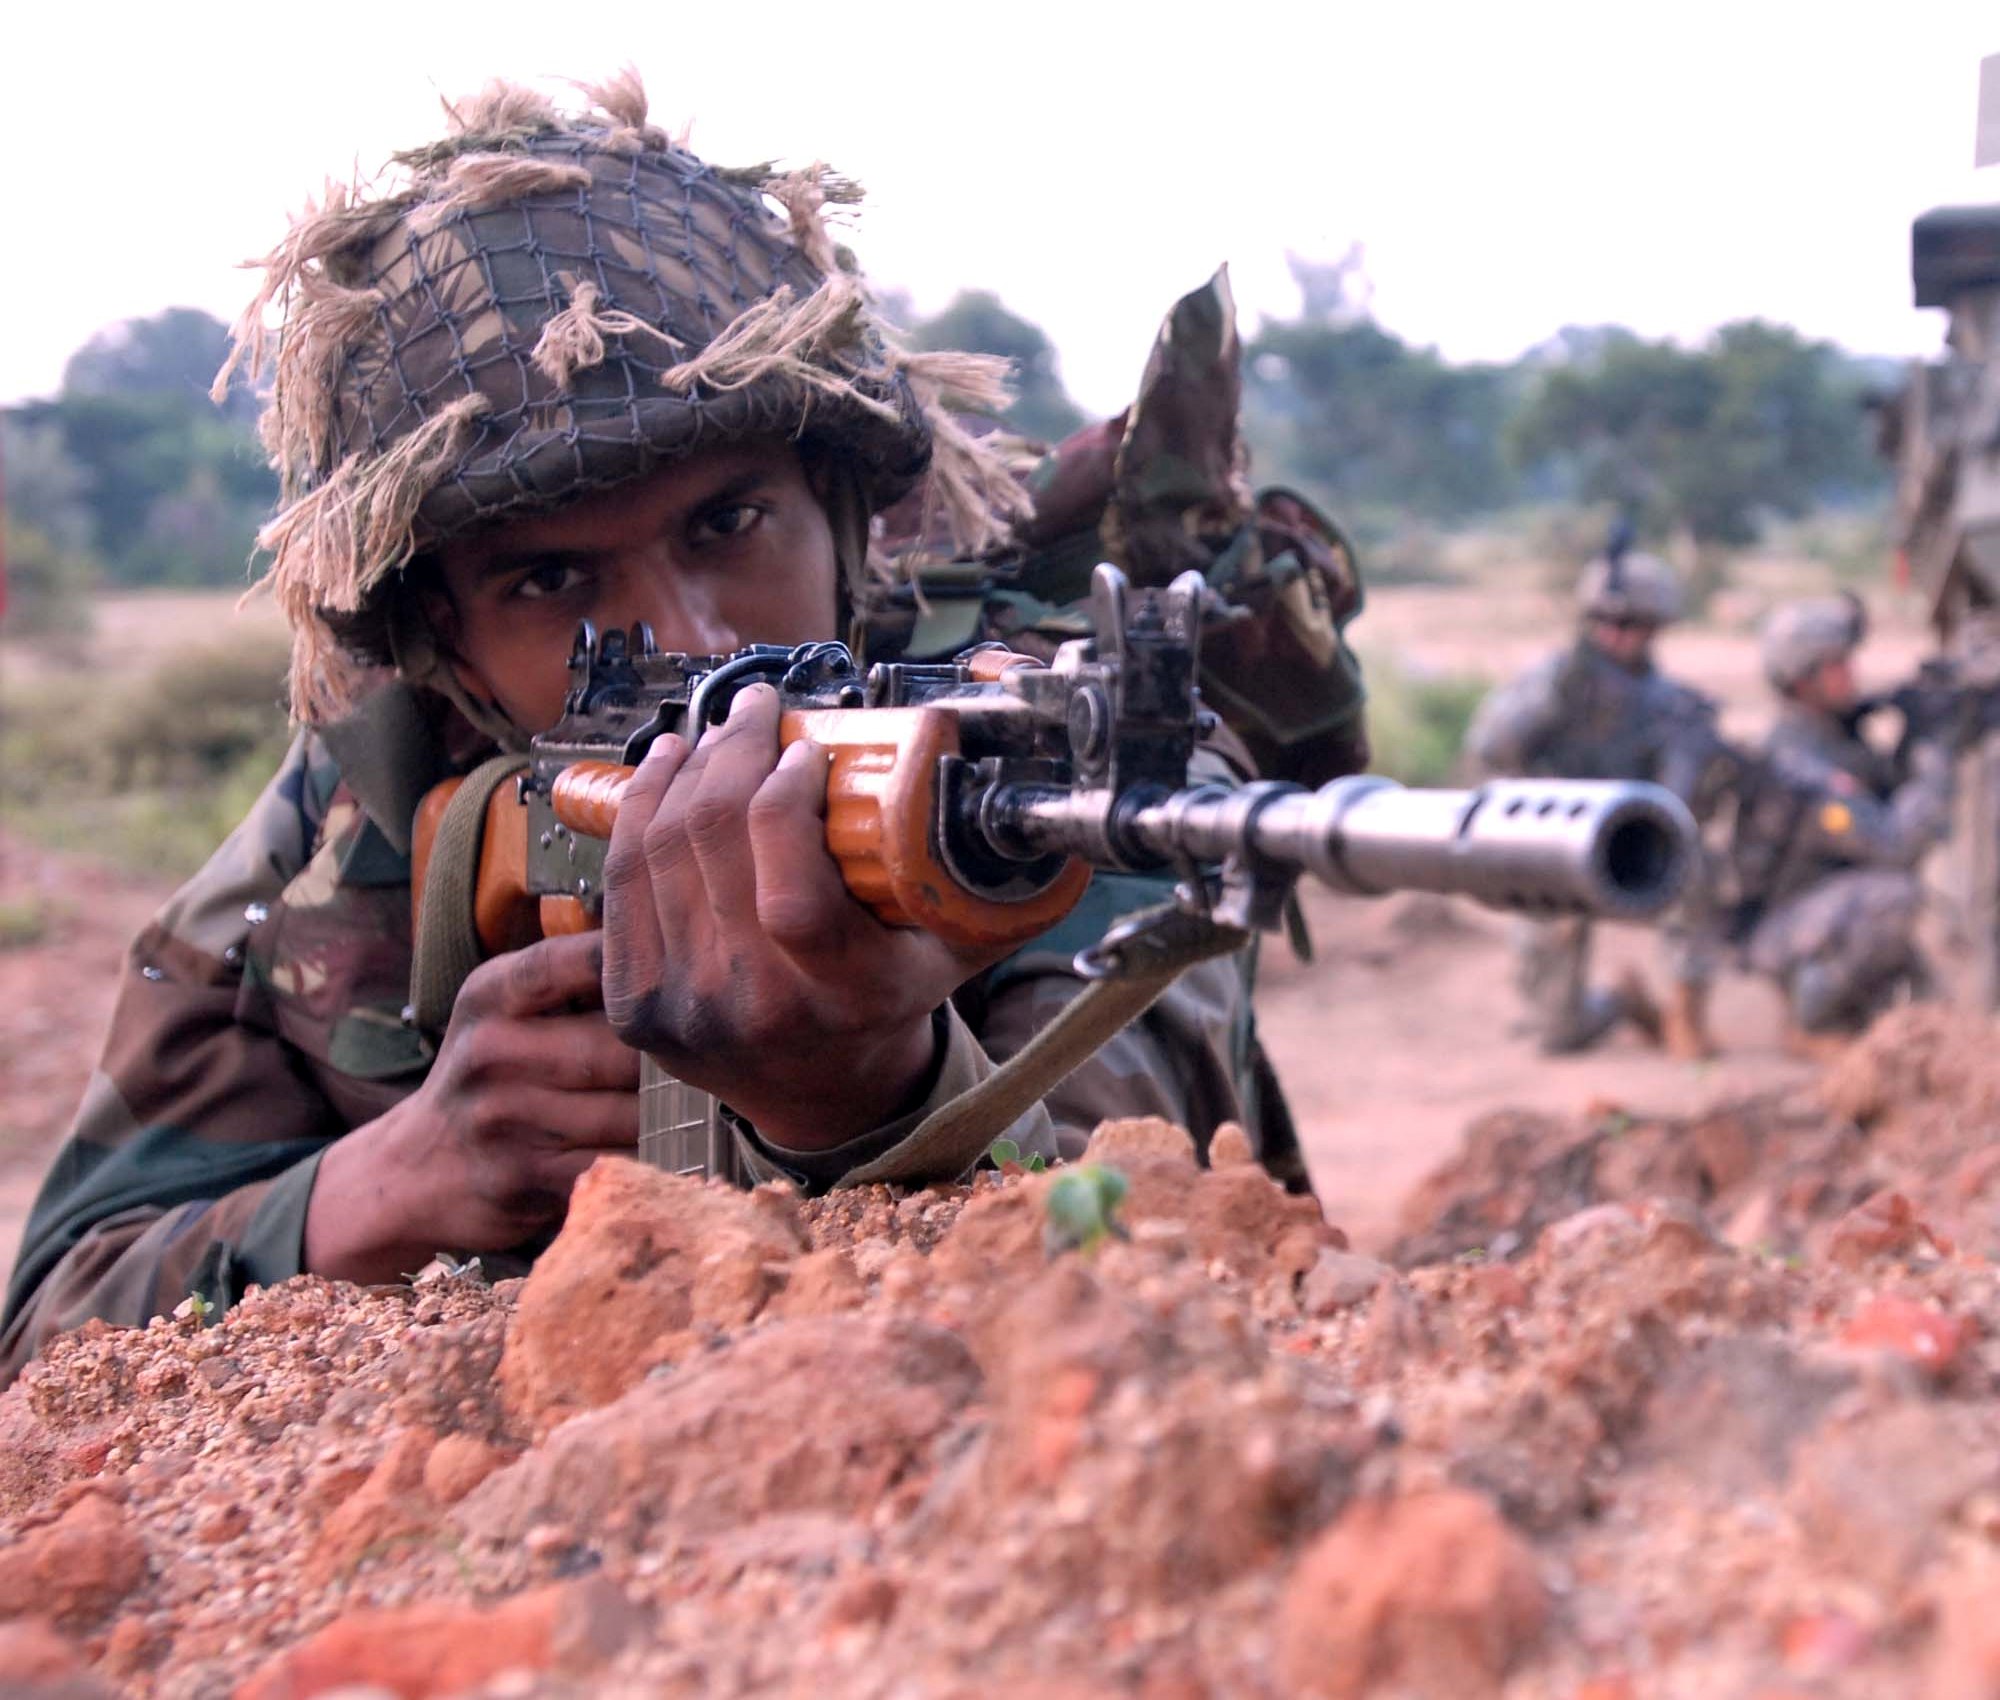 Indian Army to acquire 'Made in India' multi-mode hand grenades